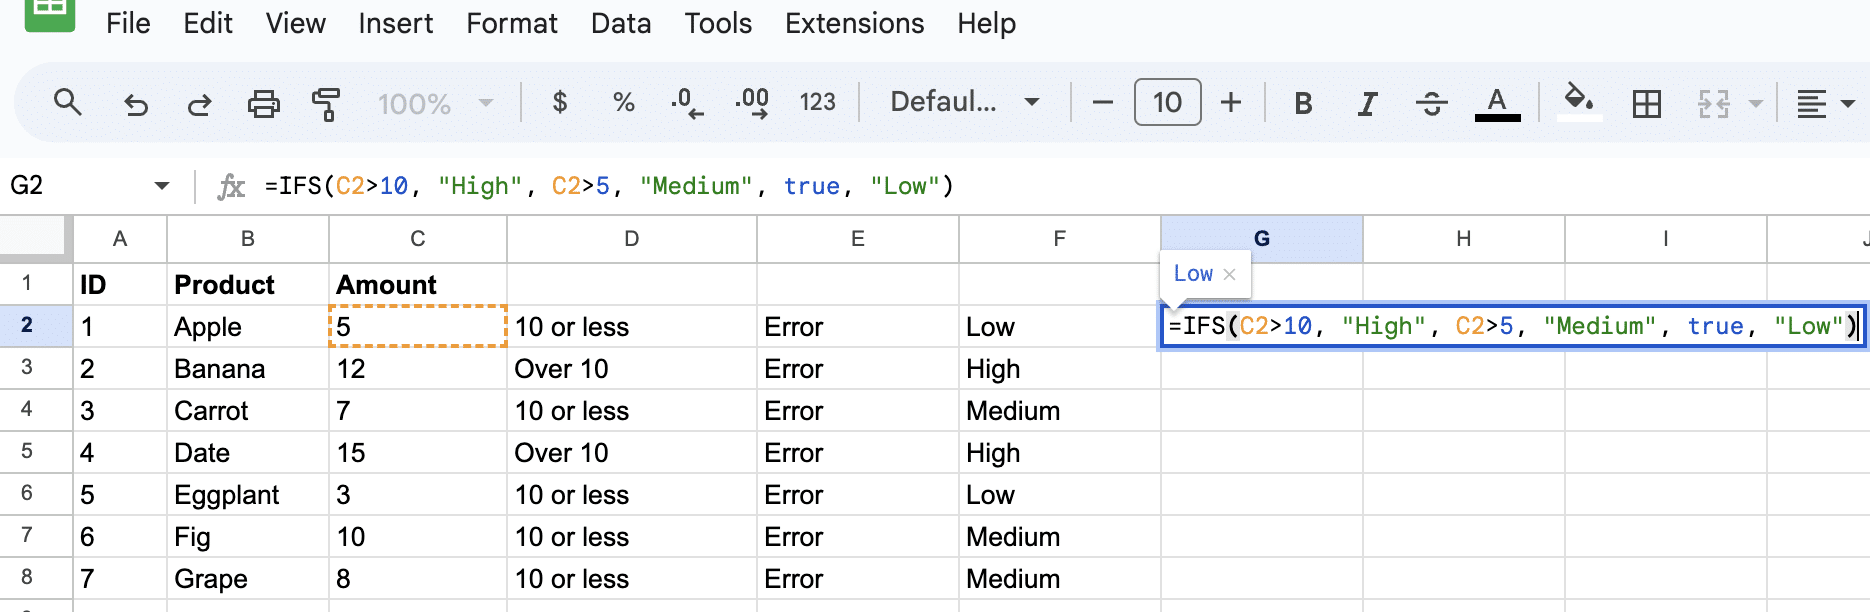 Nested IF and IFS functions for product amount classification in Google Sheets.